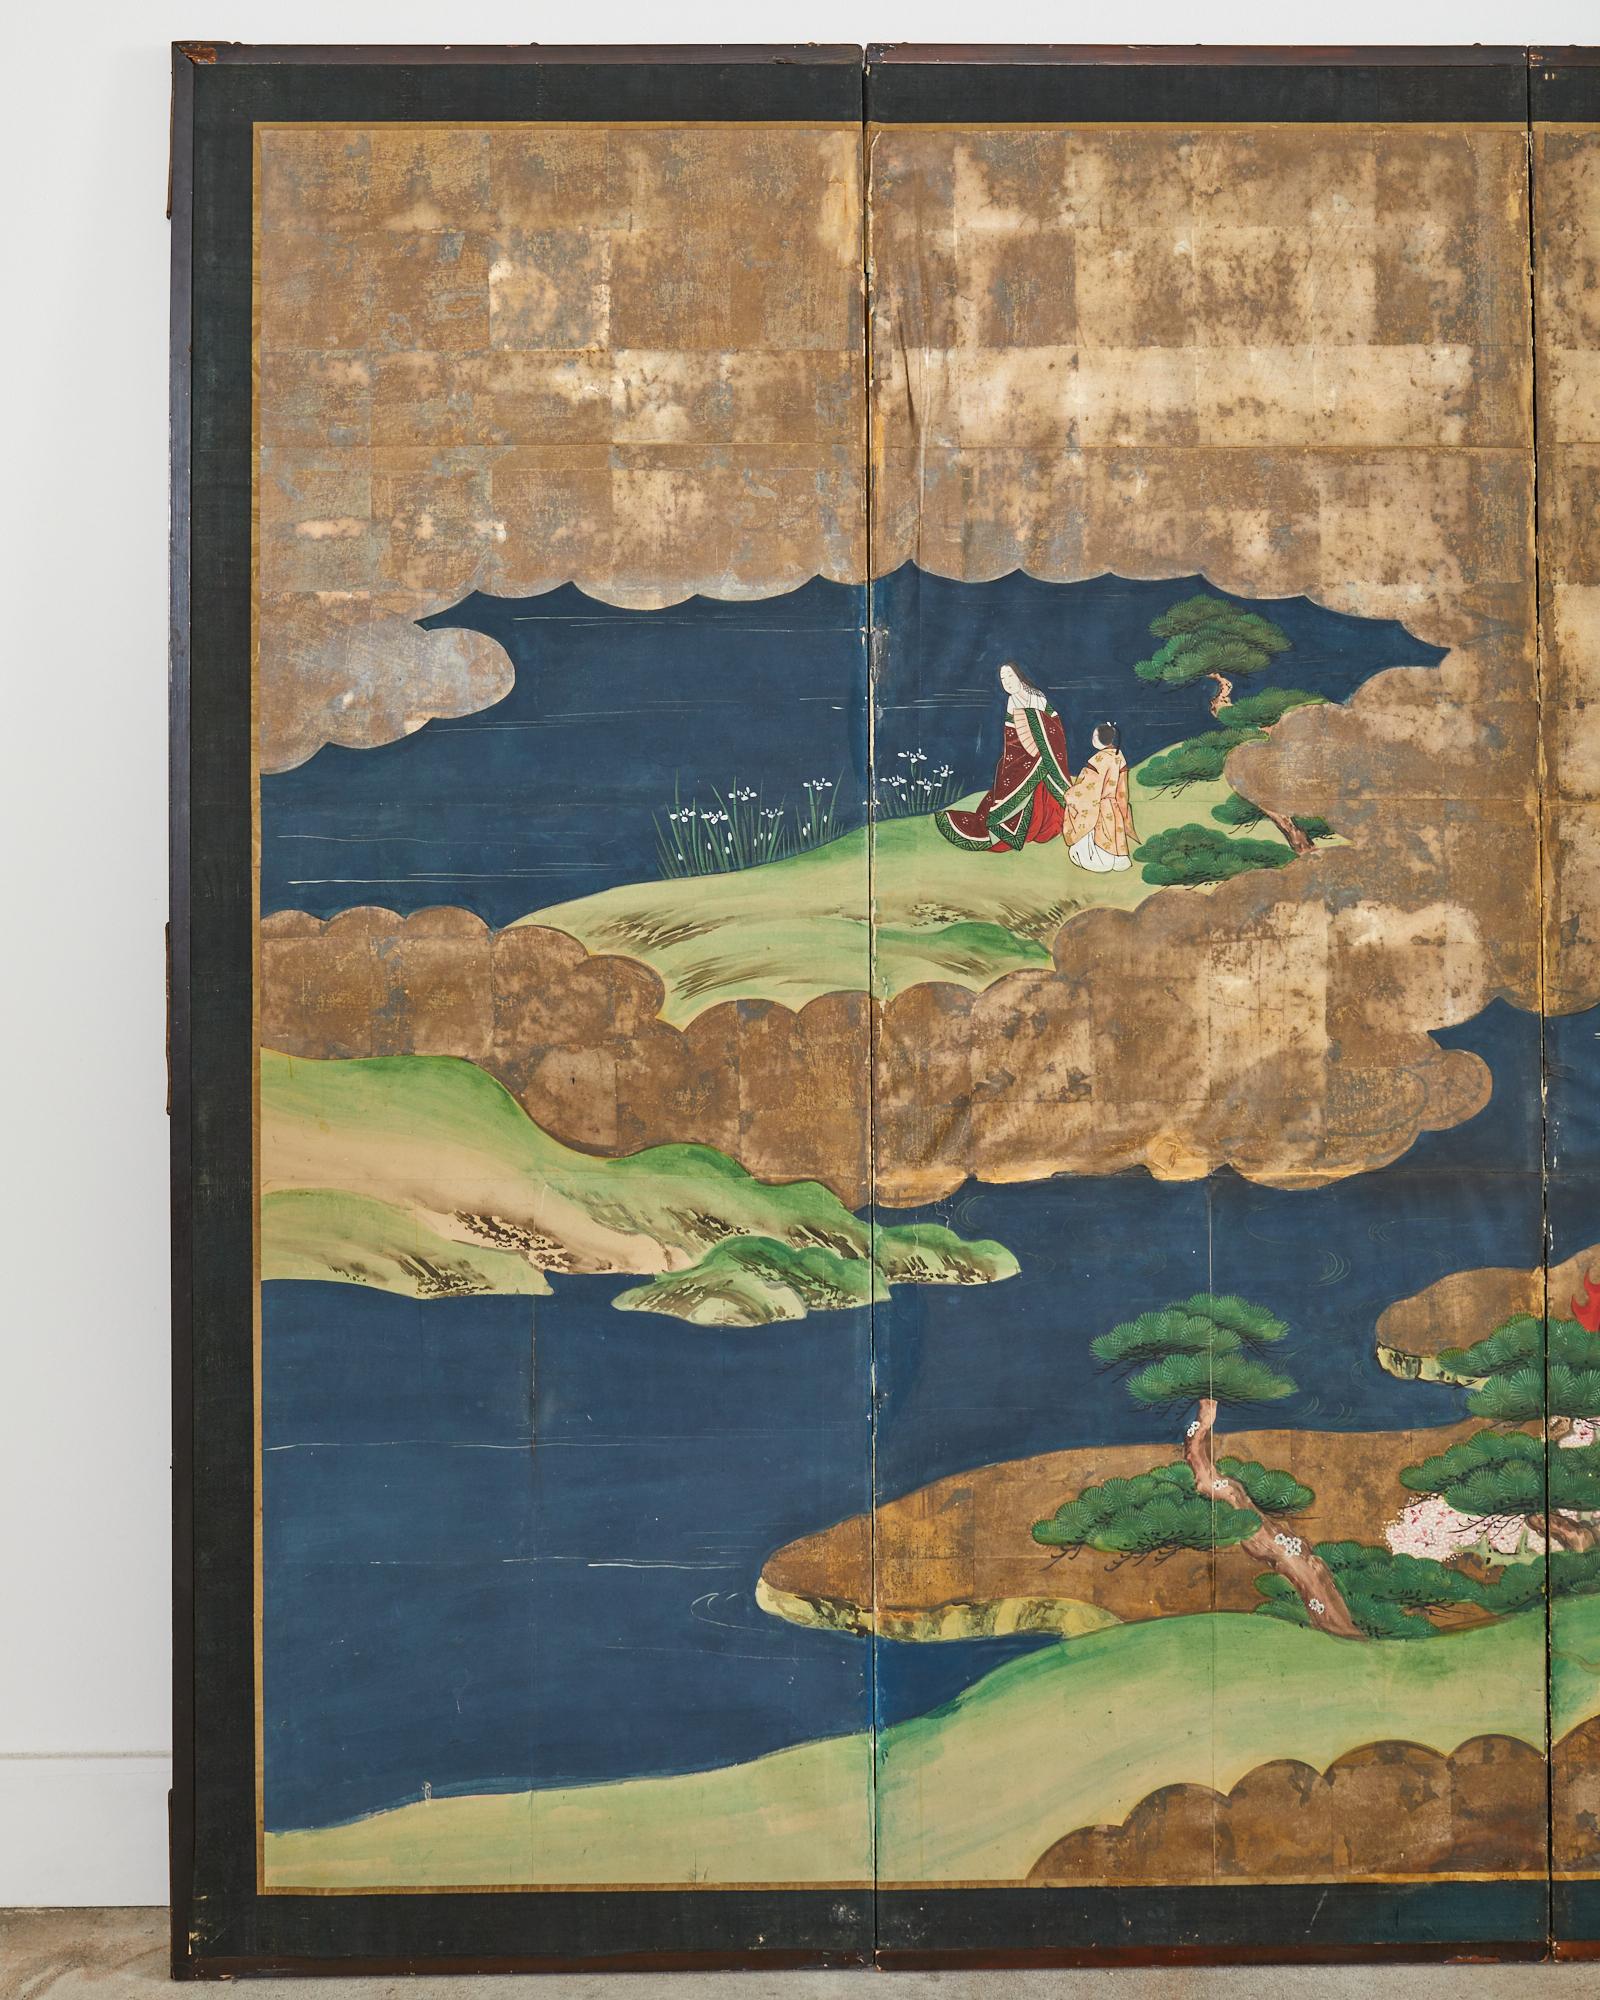 Hand-Crafted Japanese Meiji Six Panel Screen Tale of Genji Episodes